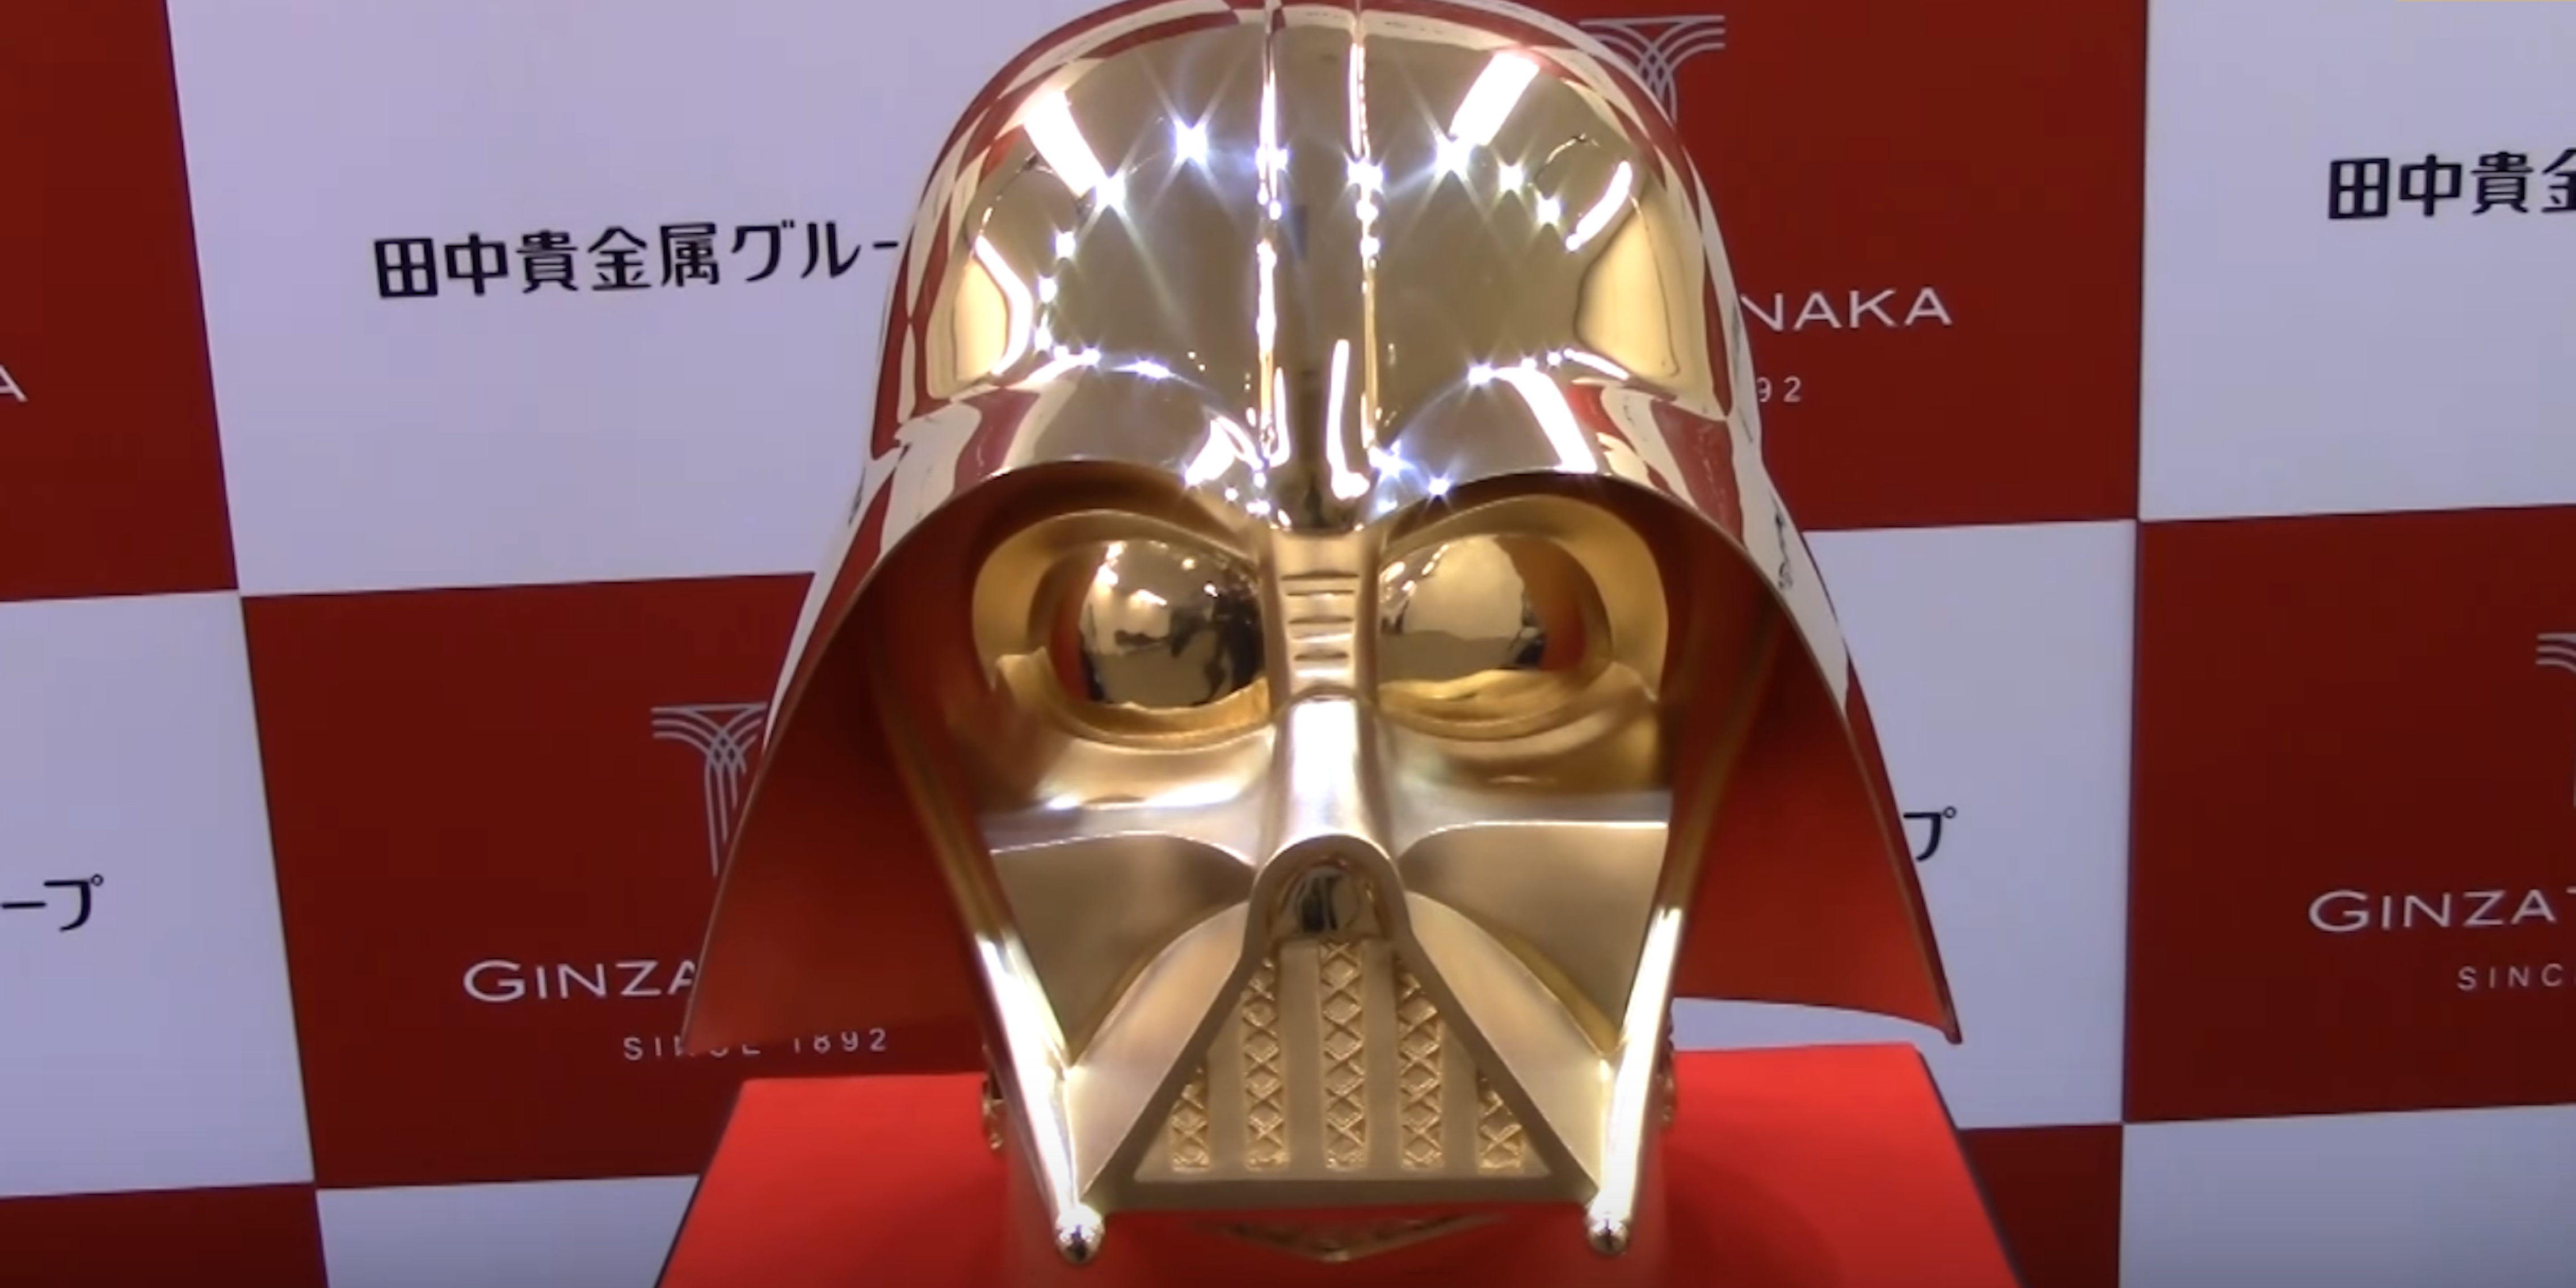 This Solid gold Darth Vader mask is selling for $1.4M